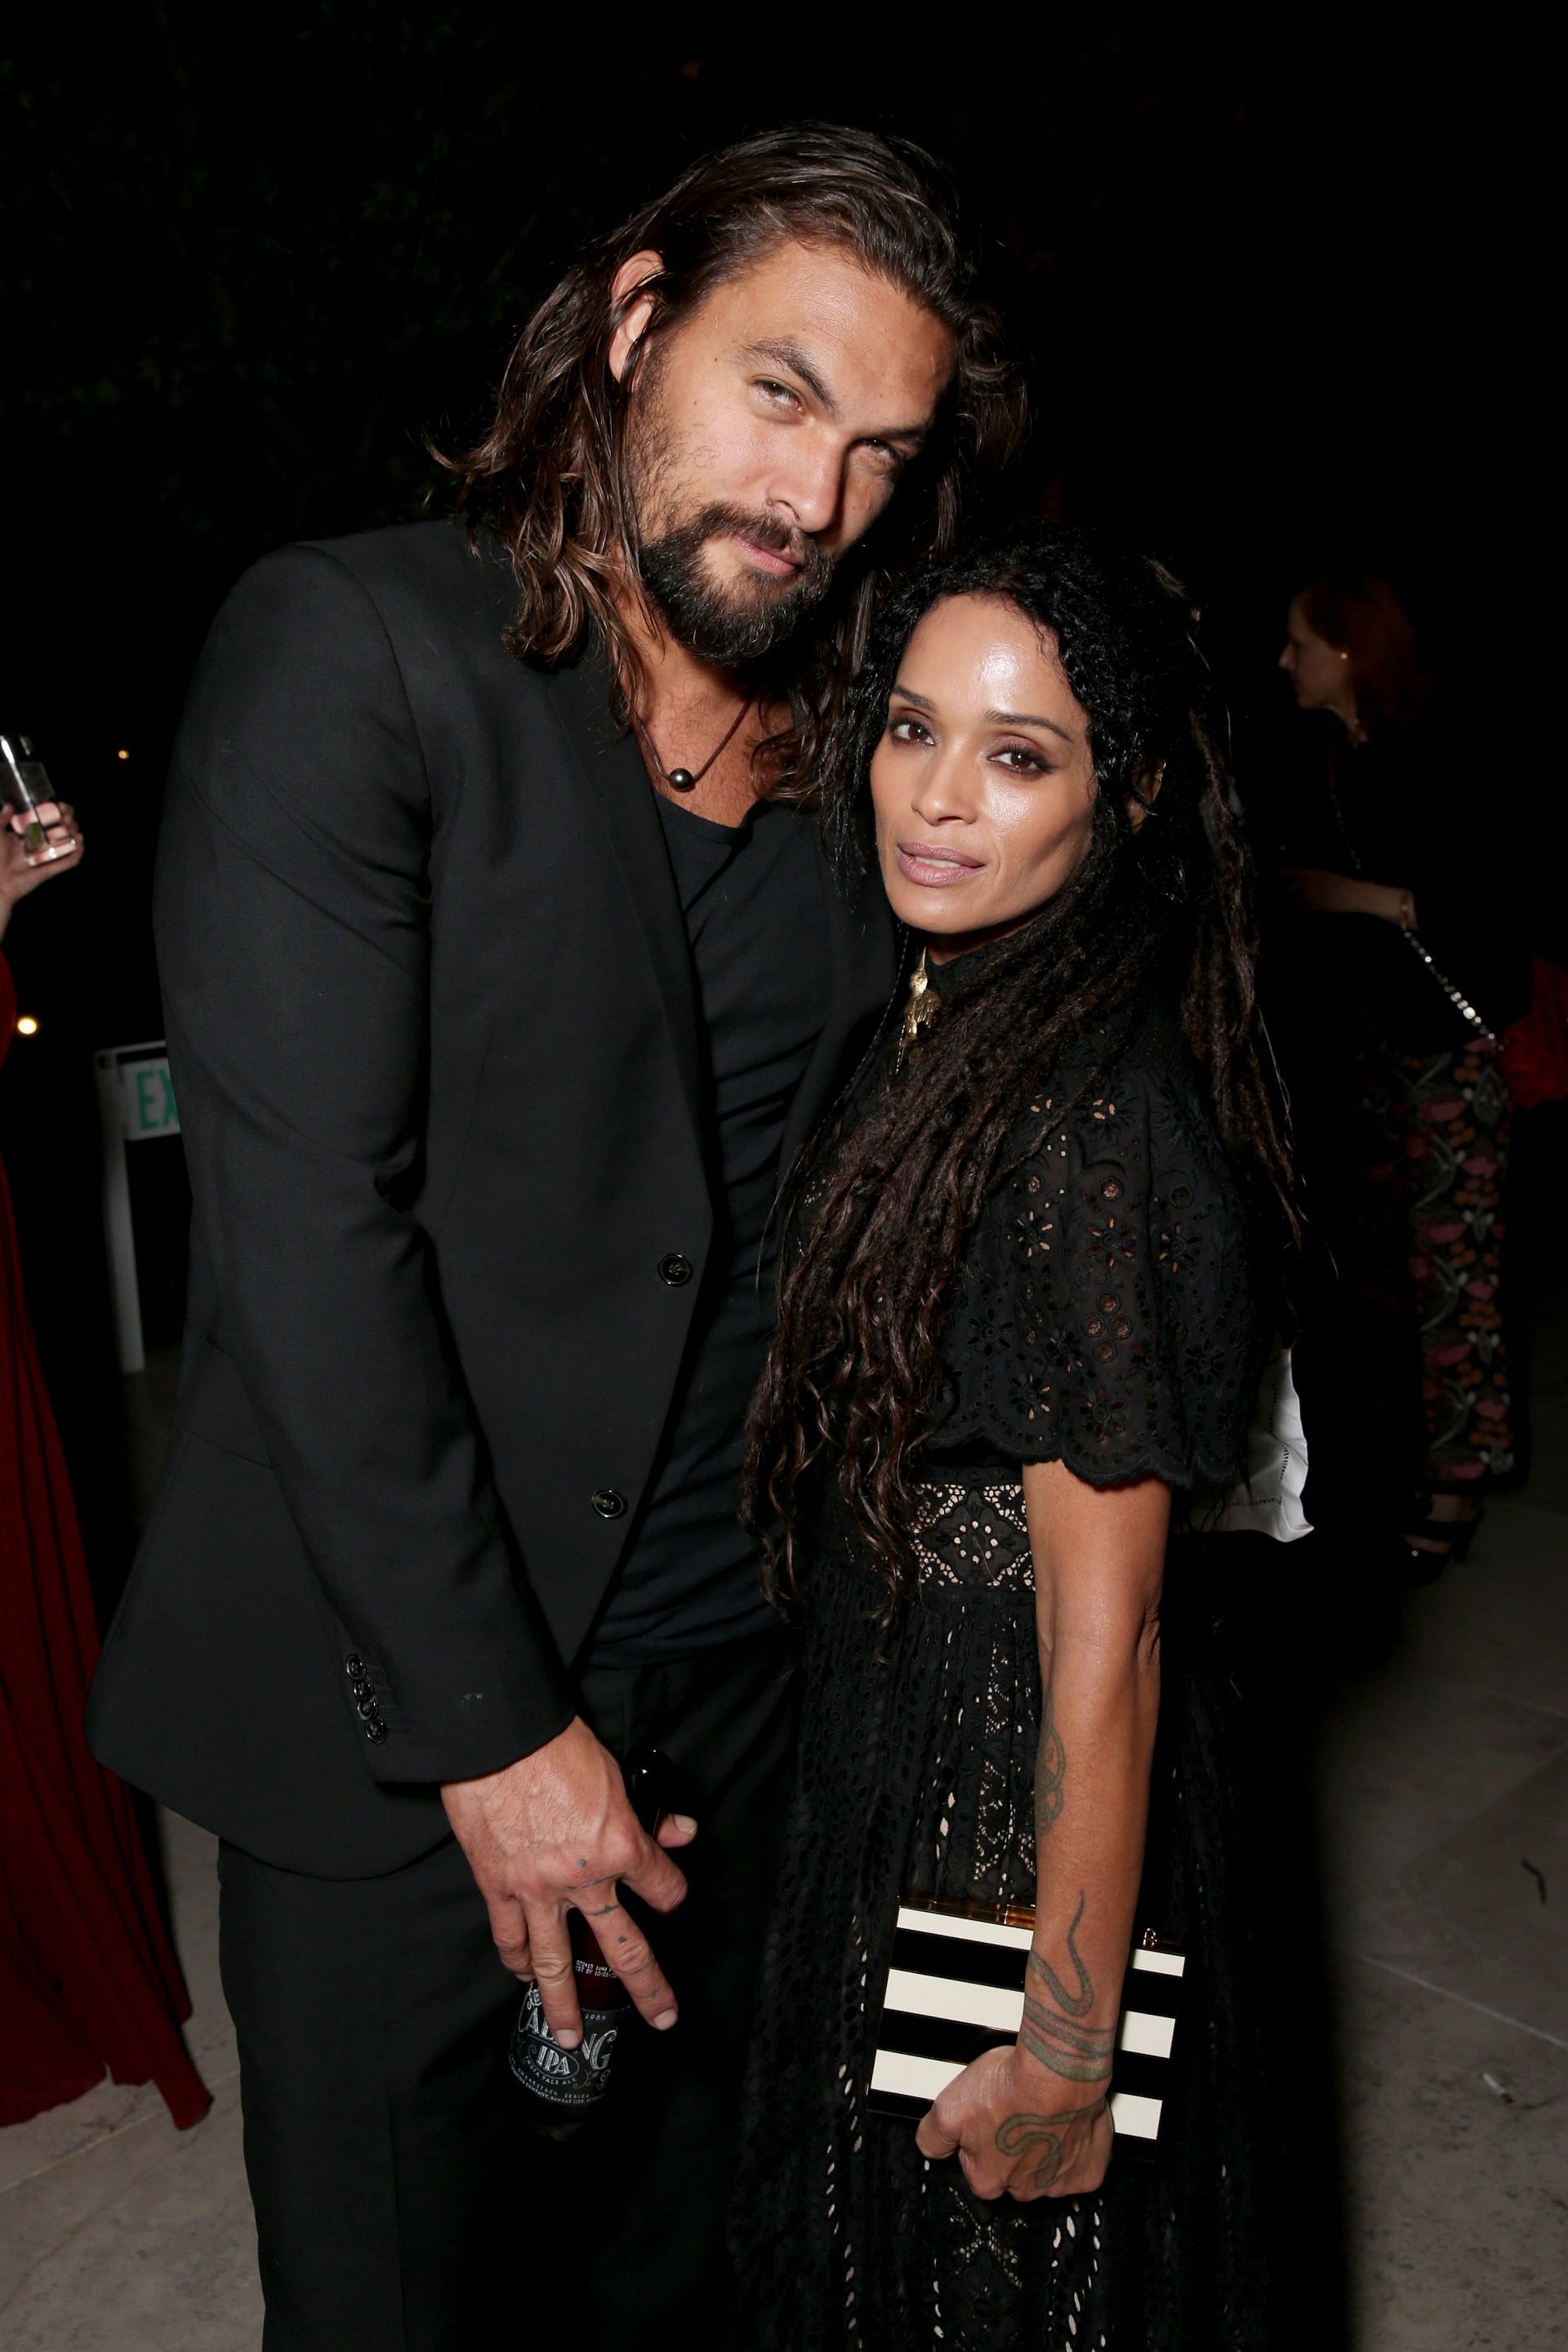 Jason Momoa and Wife on the red carpet. InStyle Awards, 2015. (Image via Getty Images)